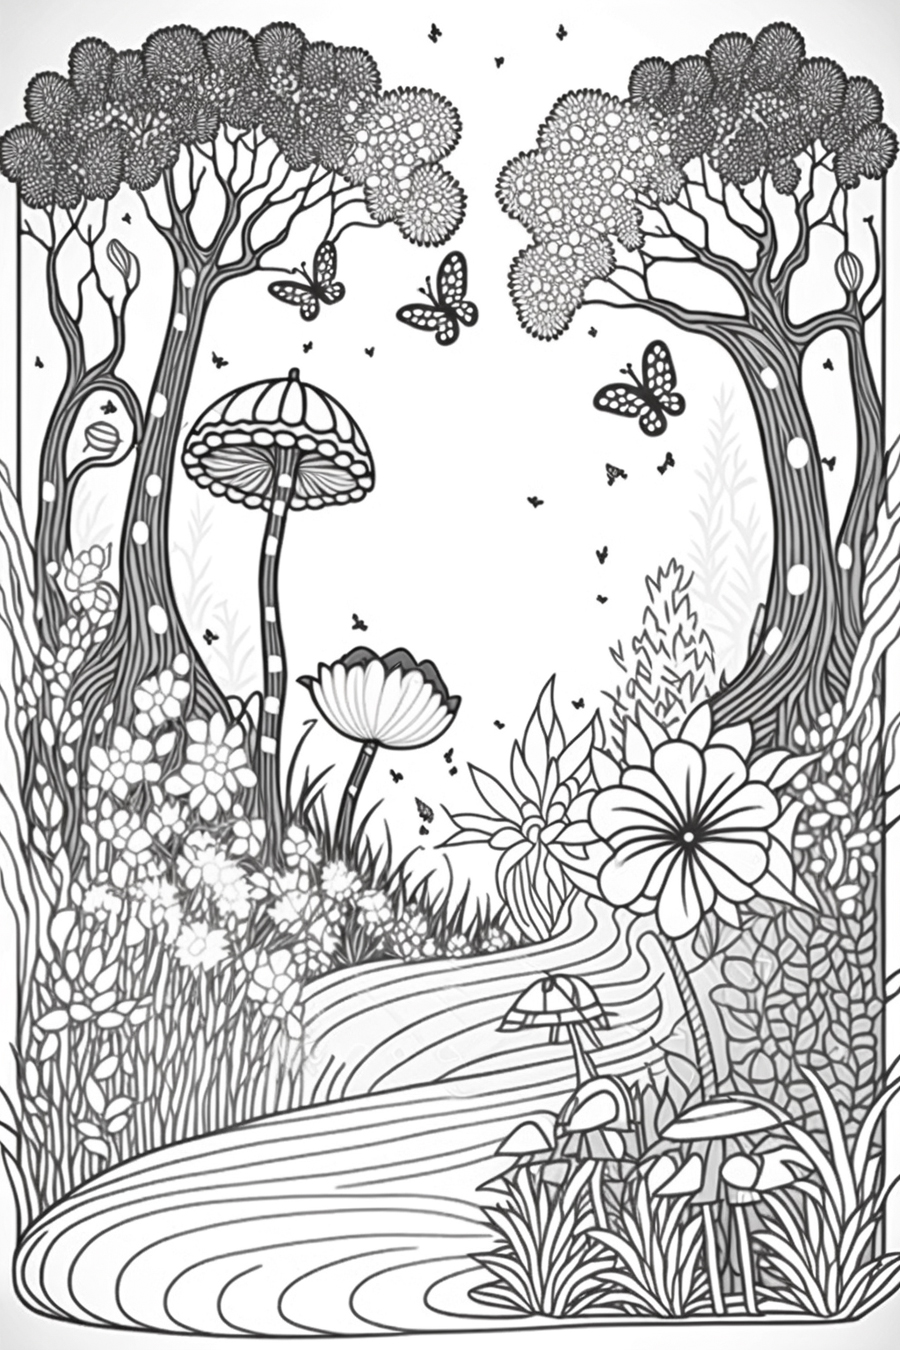 A black and white drawing of a forest with trees and butterflies.